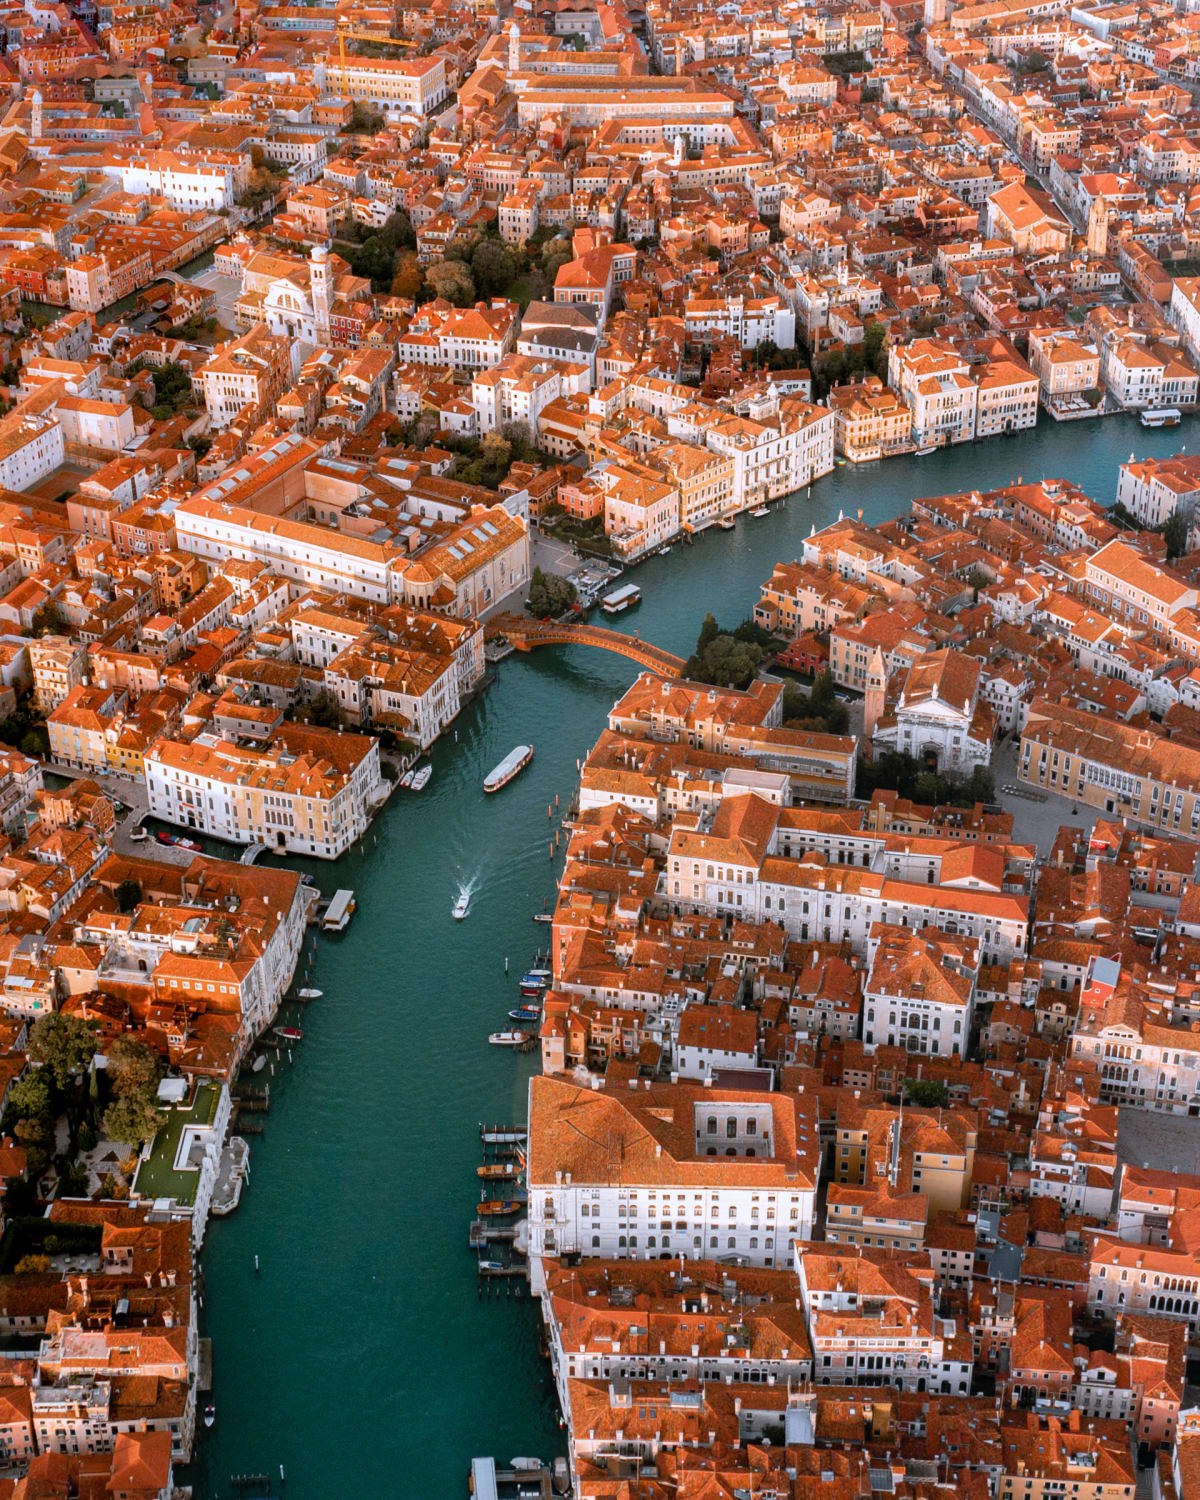 An aerial view of Venice, Italy